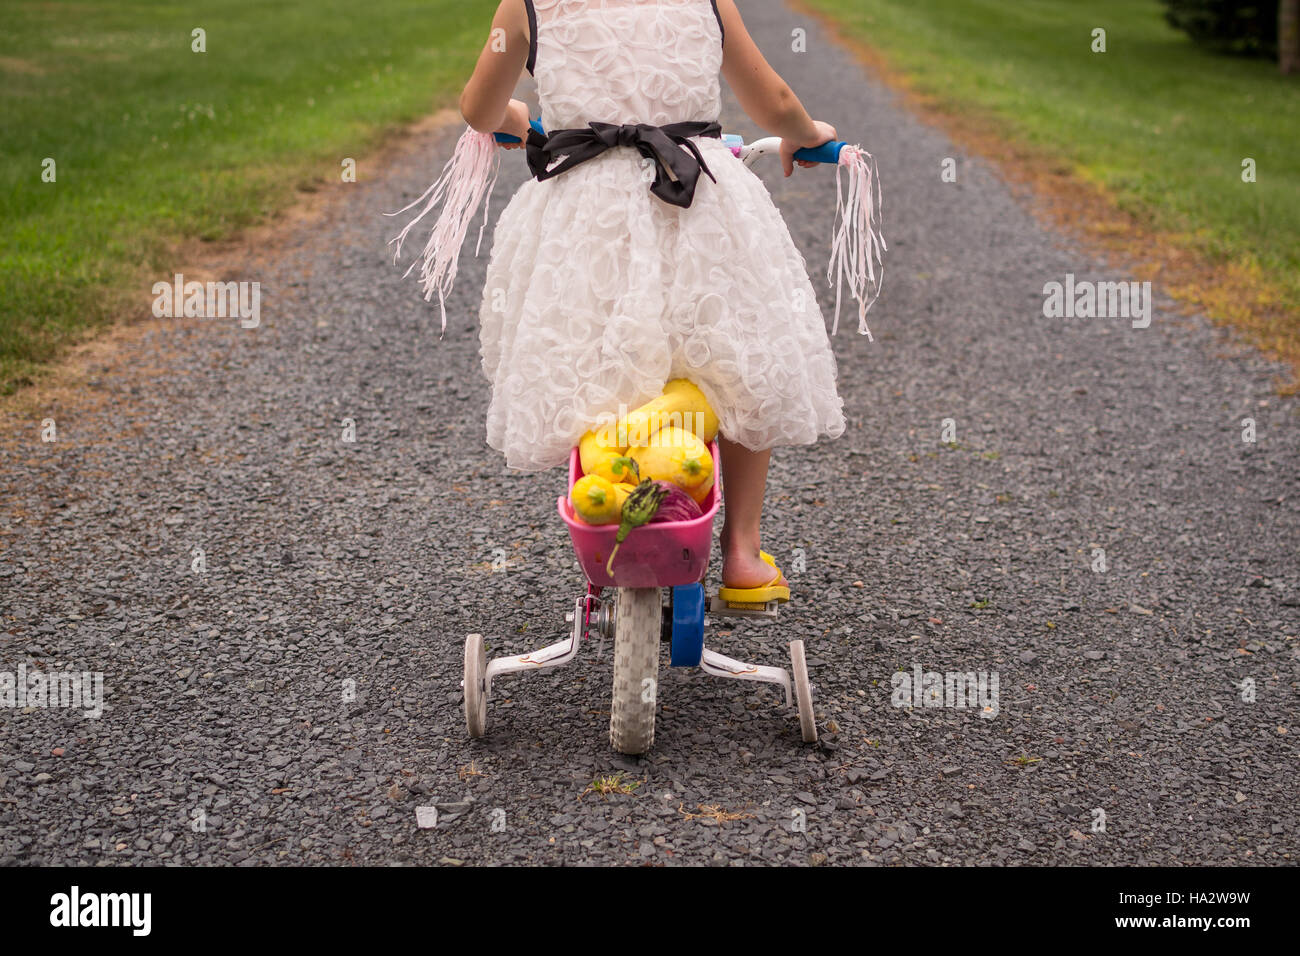 Girl riding a bike with stabilizers Stock Photo